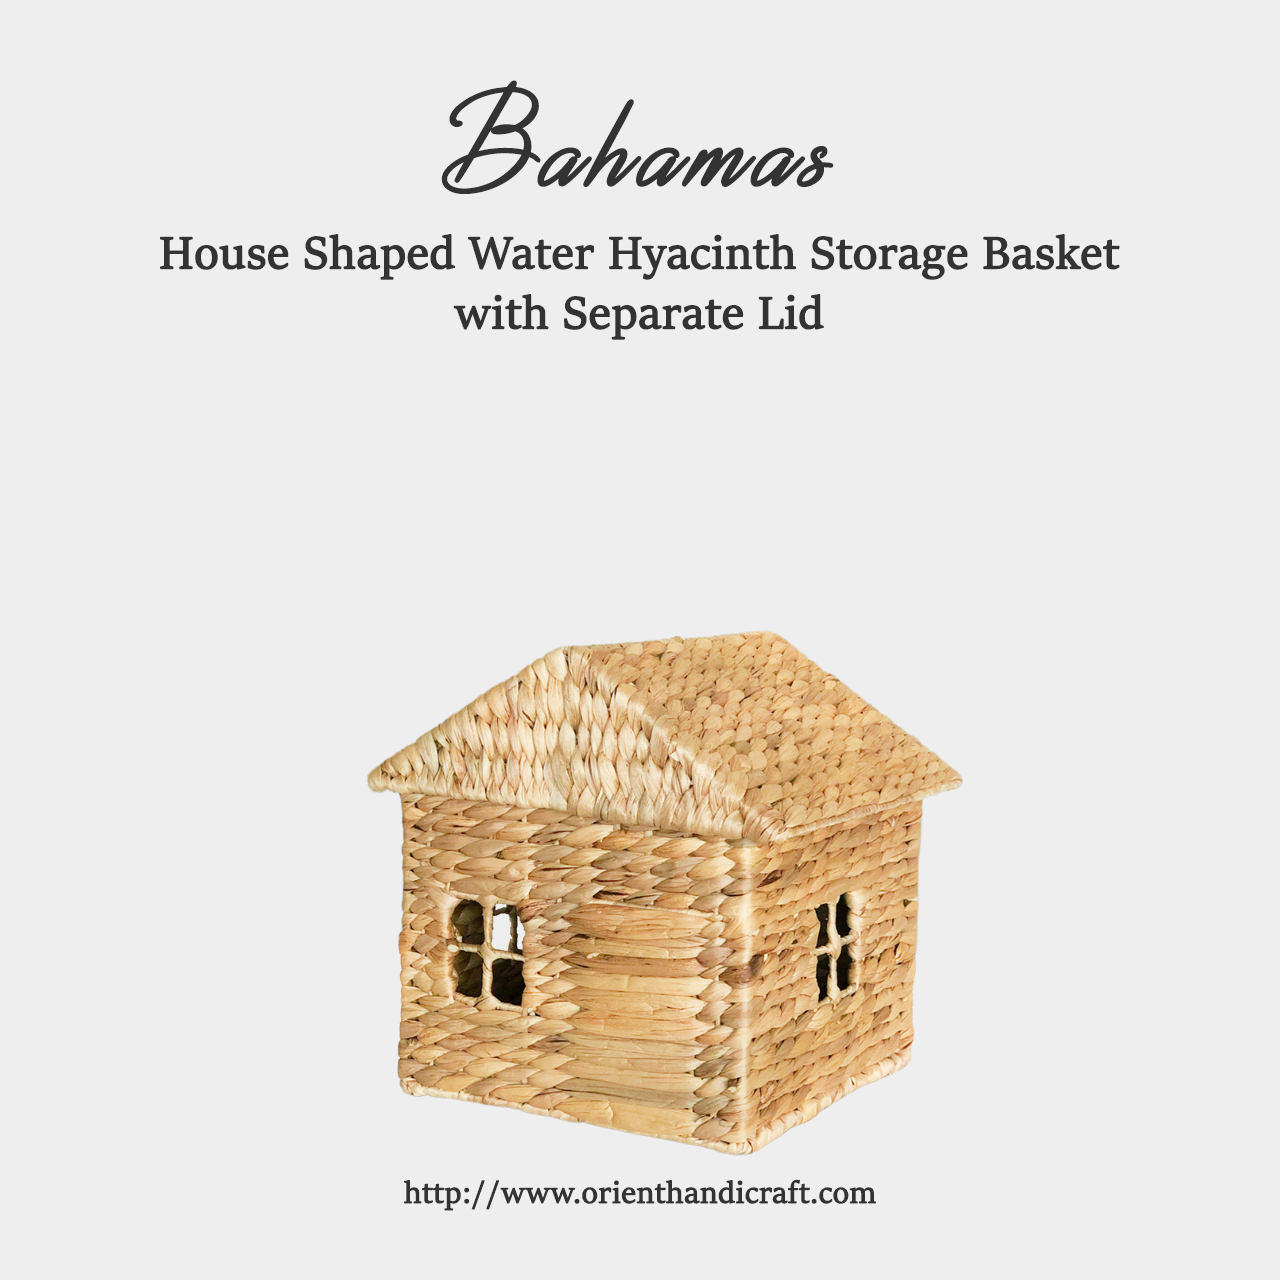 House Shaped Water Hyacinth Storage Basket with Separate Lid